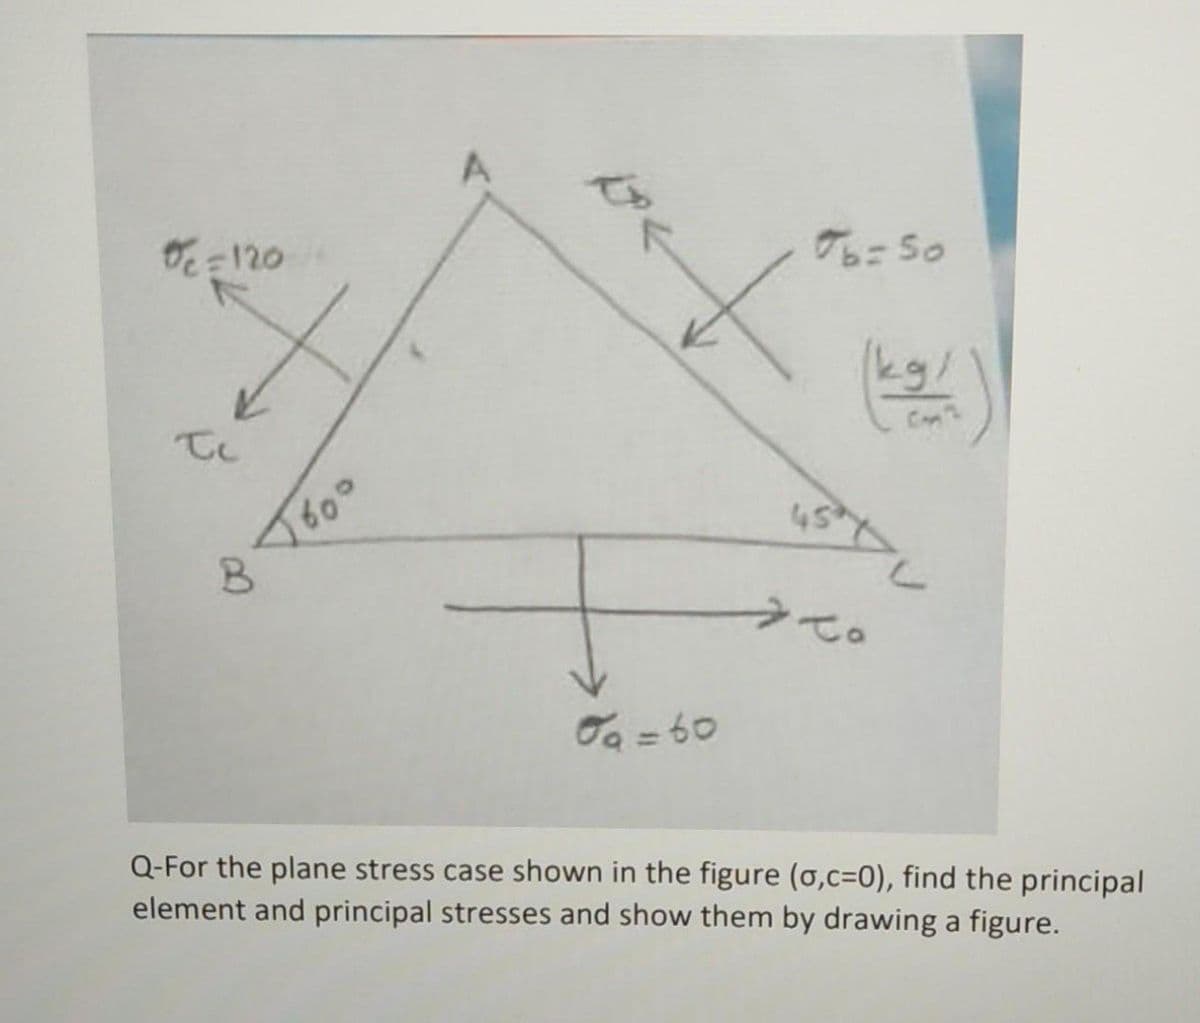 =120
45
Oa = 60
Q-For the plane stress case shown in the figure (o,c=0), find the principal
element and principal stresses and show them by drawing a figure.
